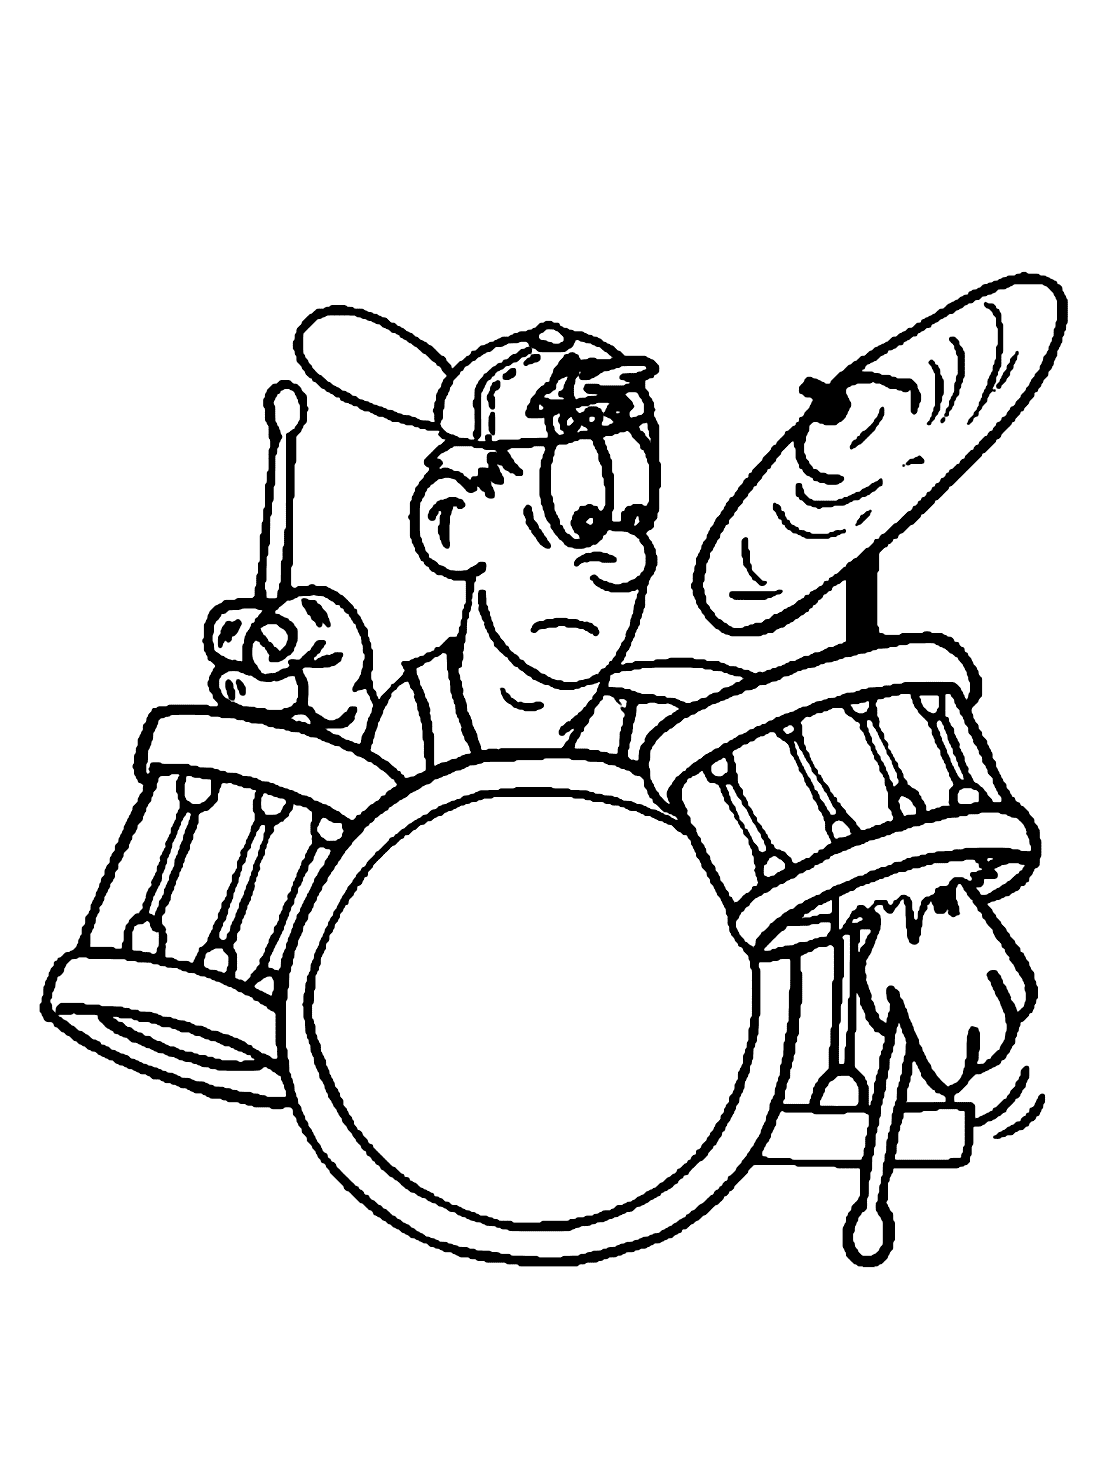 Bass drum coloring pages